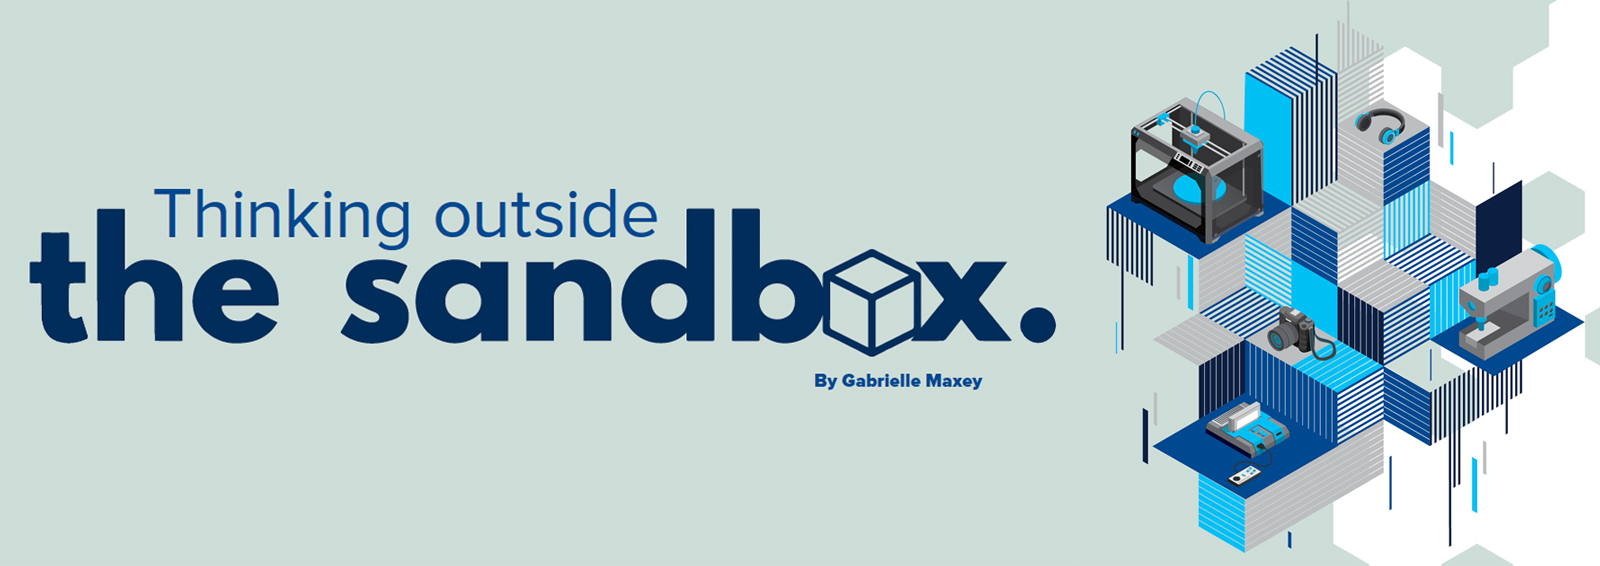 Thinking Outside the Sandbox.  By Gabrielle Maxey